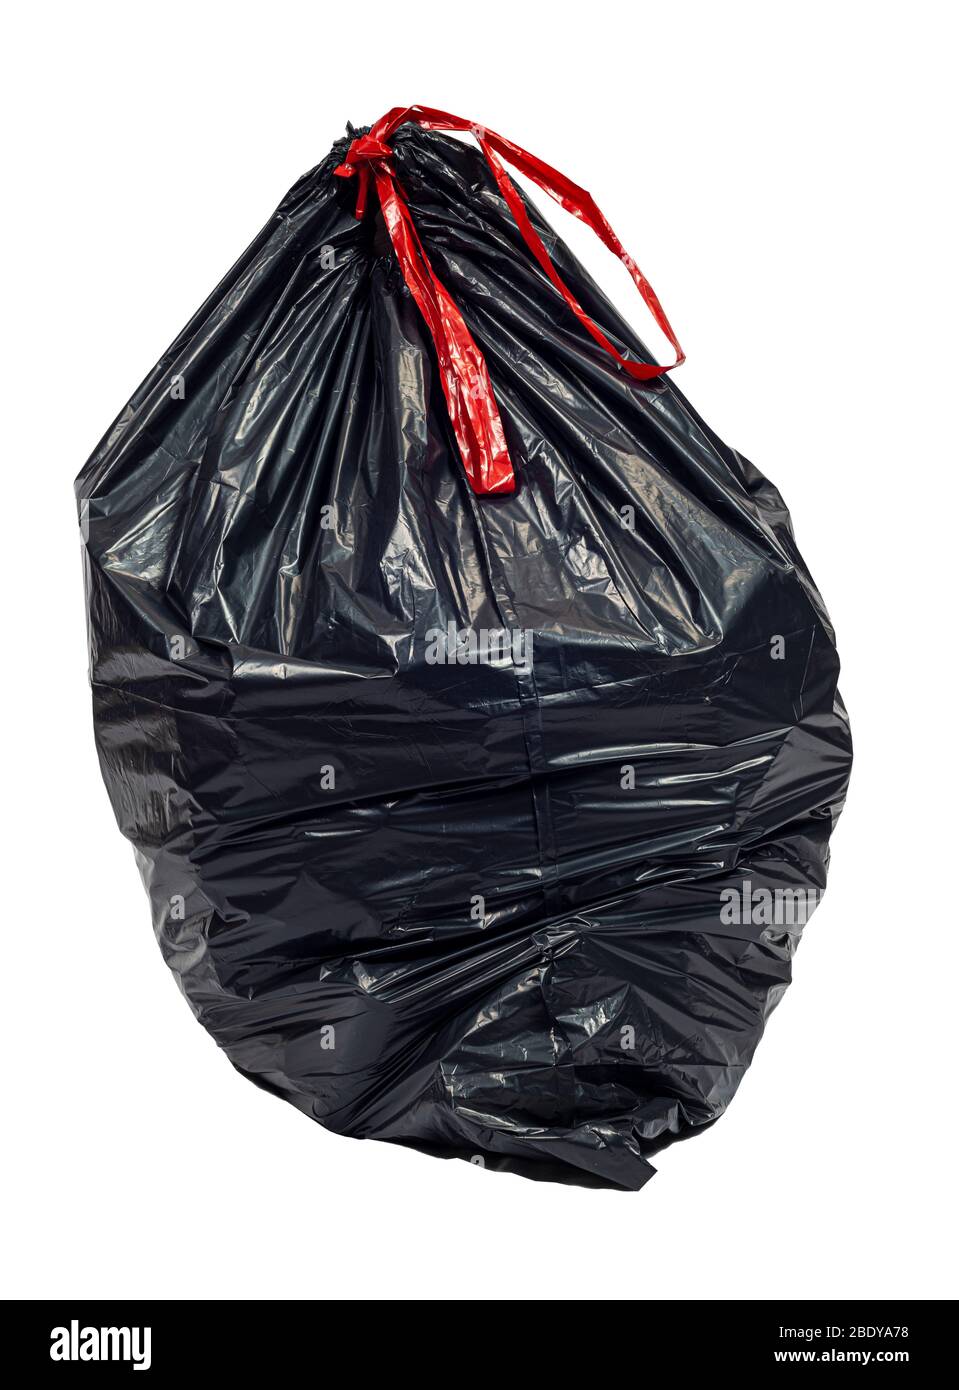 https://c8.alamy.com/comp/2BDYA78/vertical-shot-of-a-full-black-trash-bag-with-the-top-closed-red-ties-isolated-on-white-2BDYA78.jpg